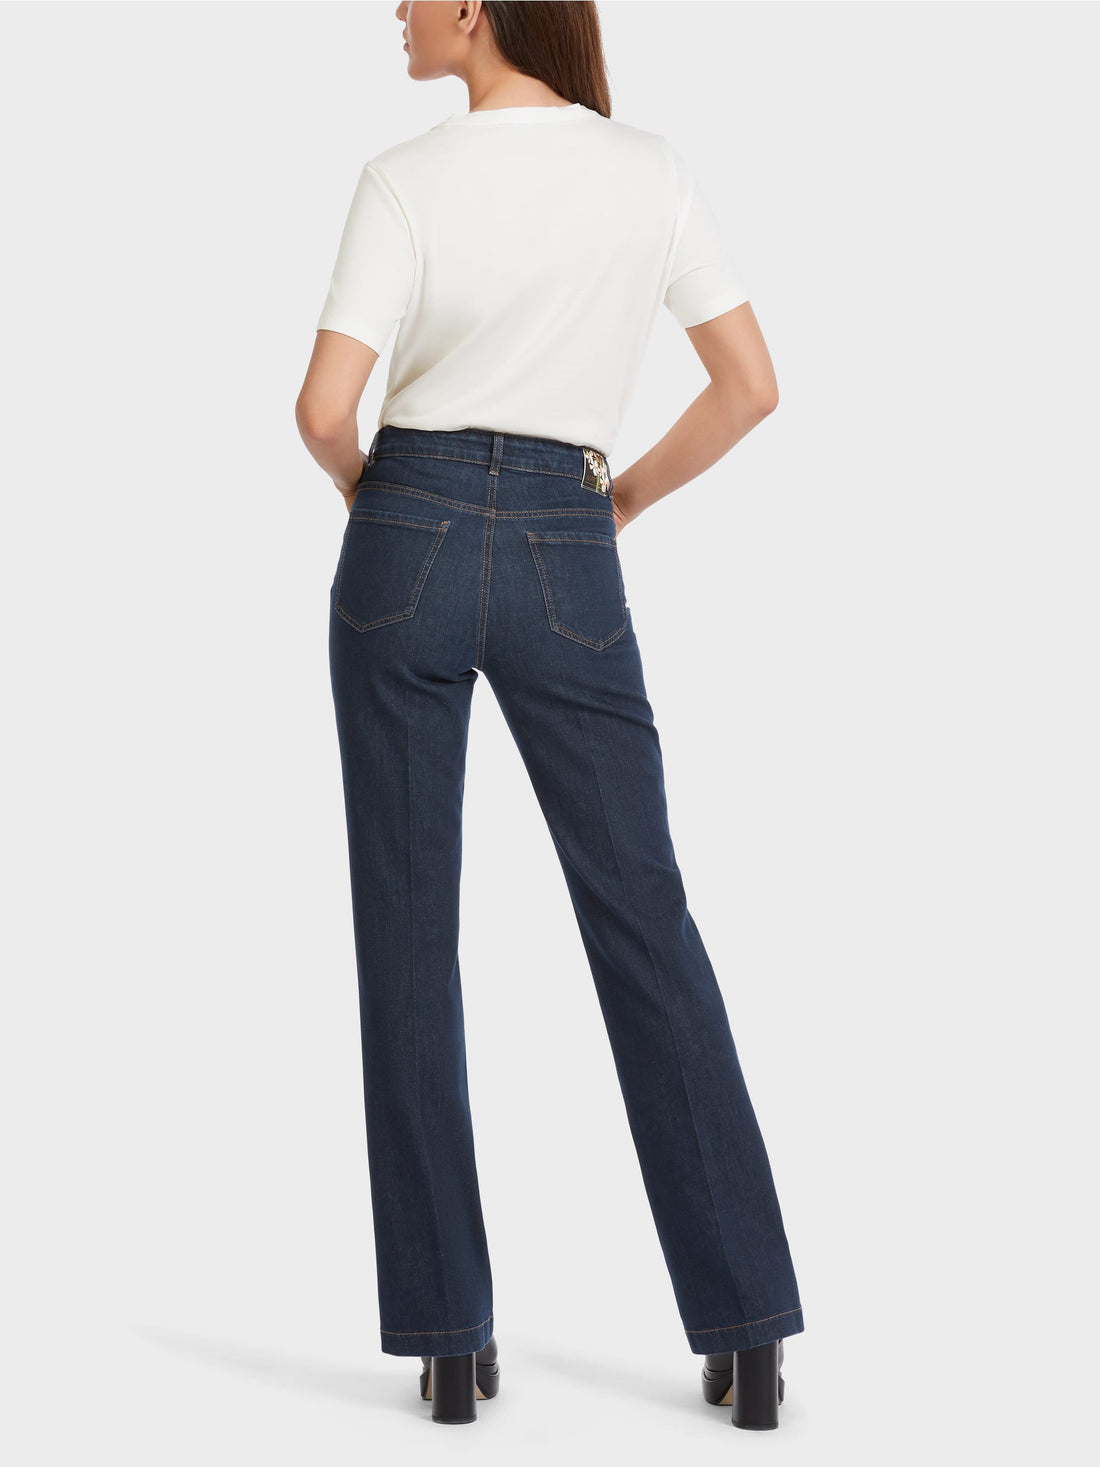 Faro &quot;Rethink Together&quot; Jeans_VC 82.16 D52_357_02